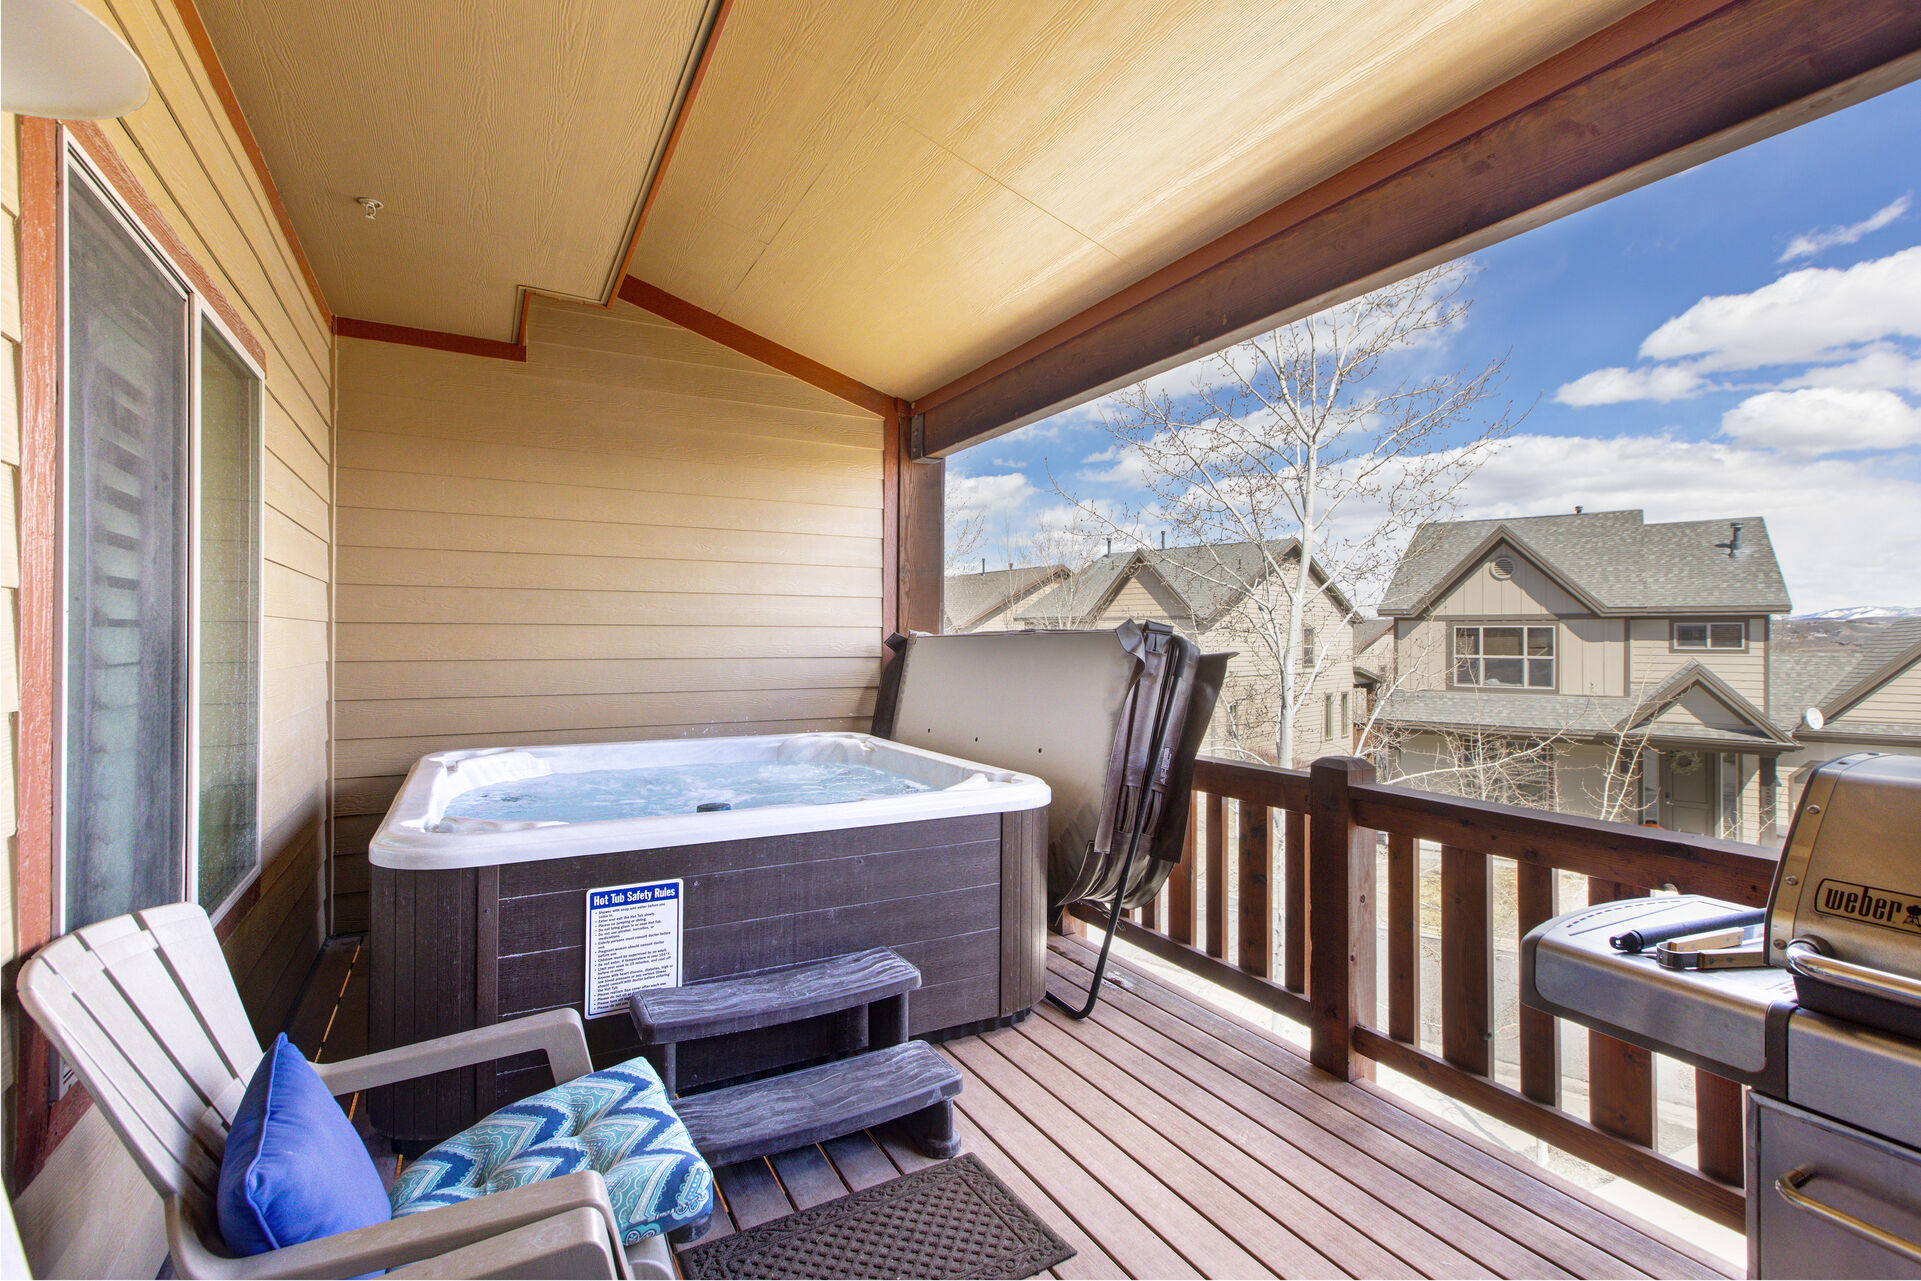 Main Level Deck with a Private 6-8 Person Hot Tub, Adirondack Chairs and a Natural Gas BBQ